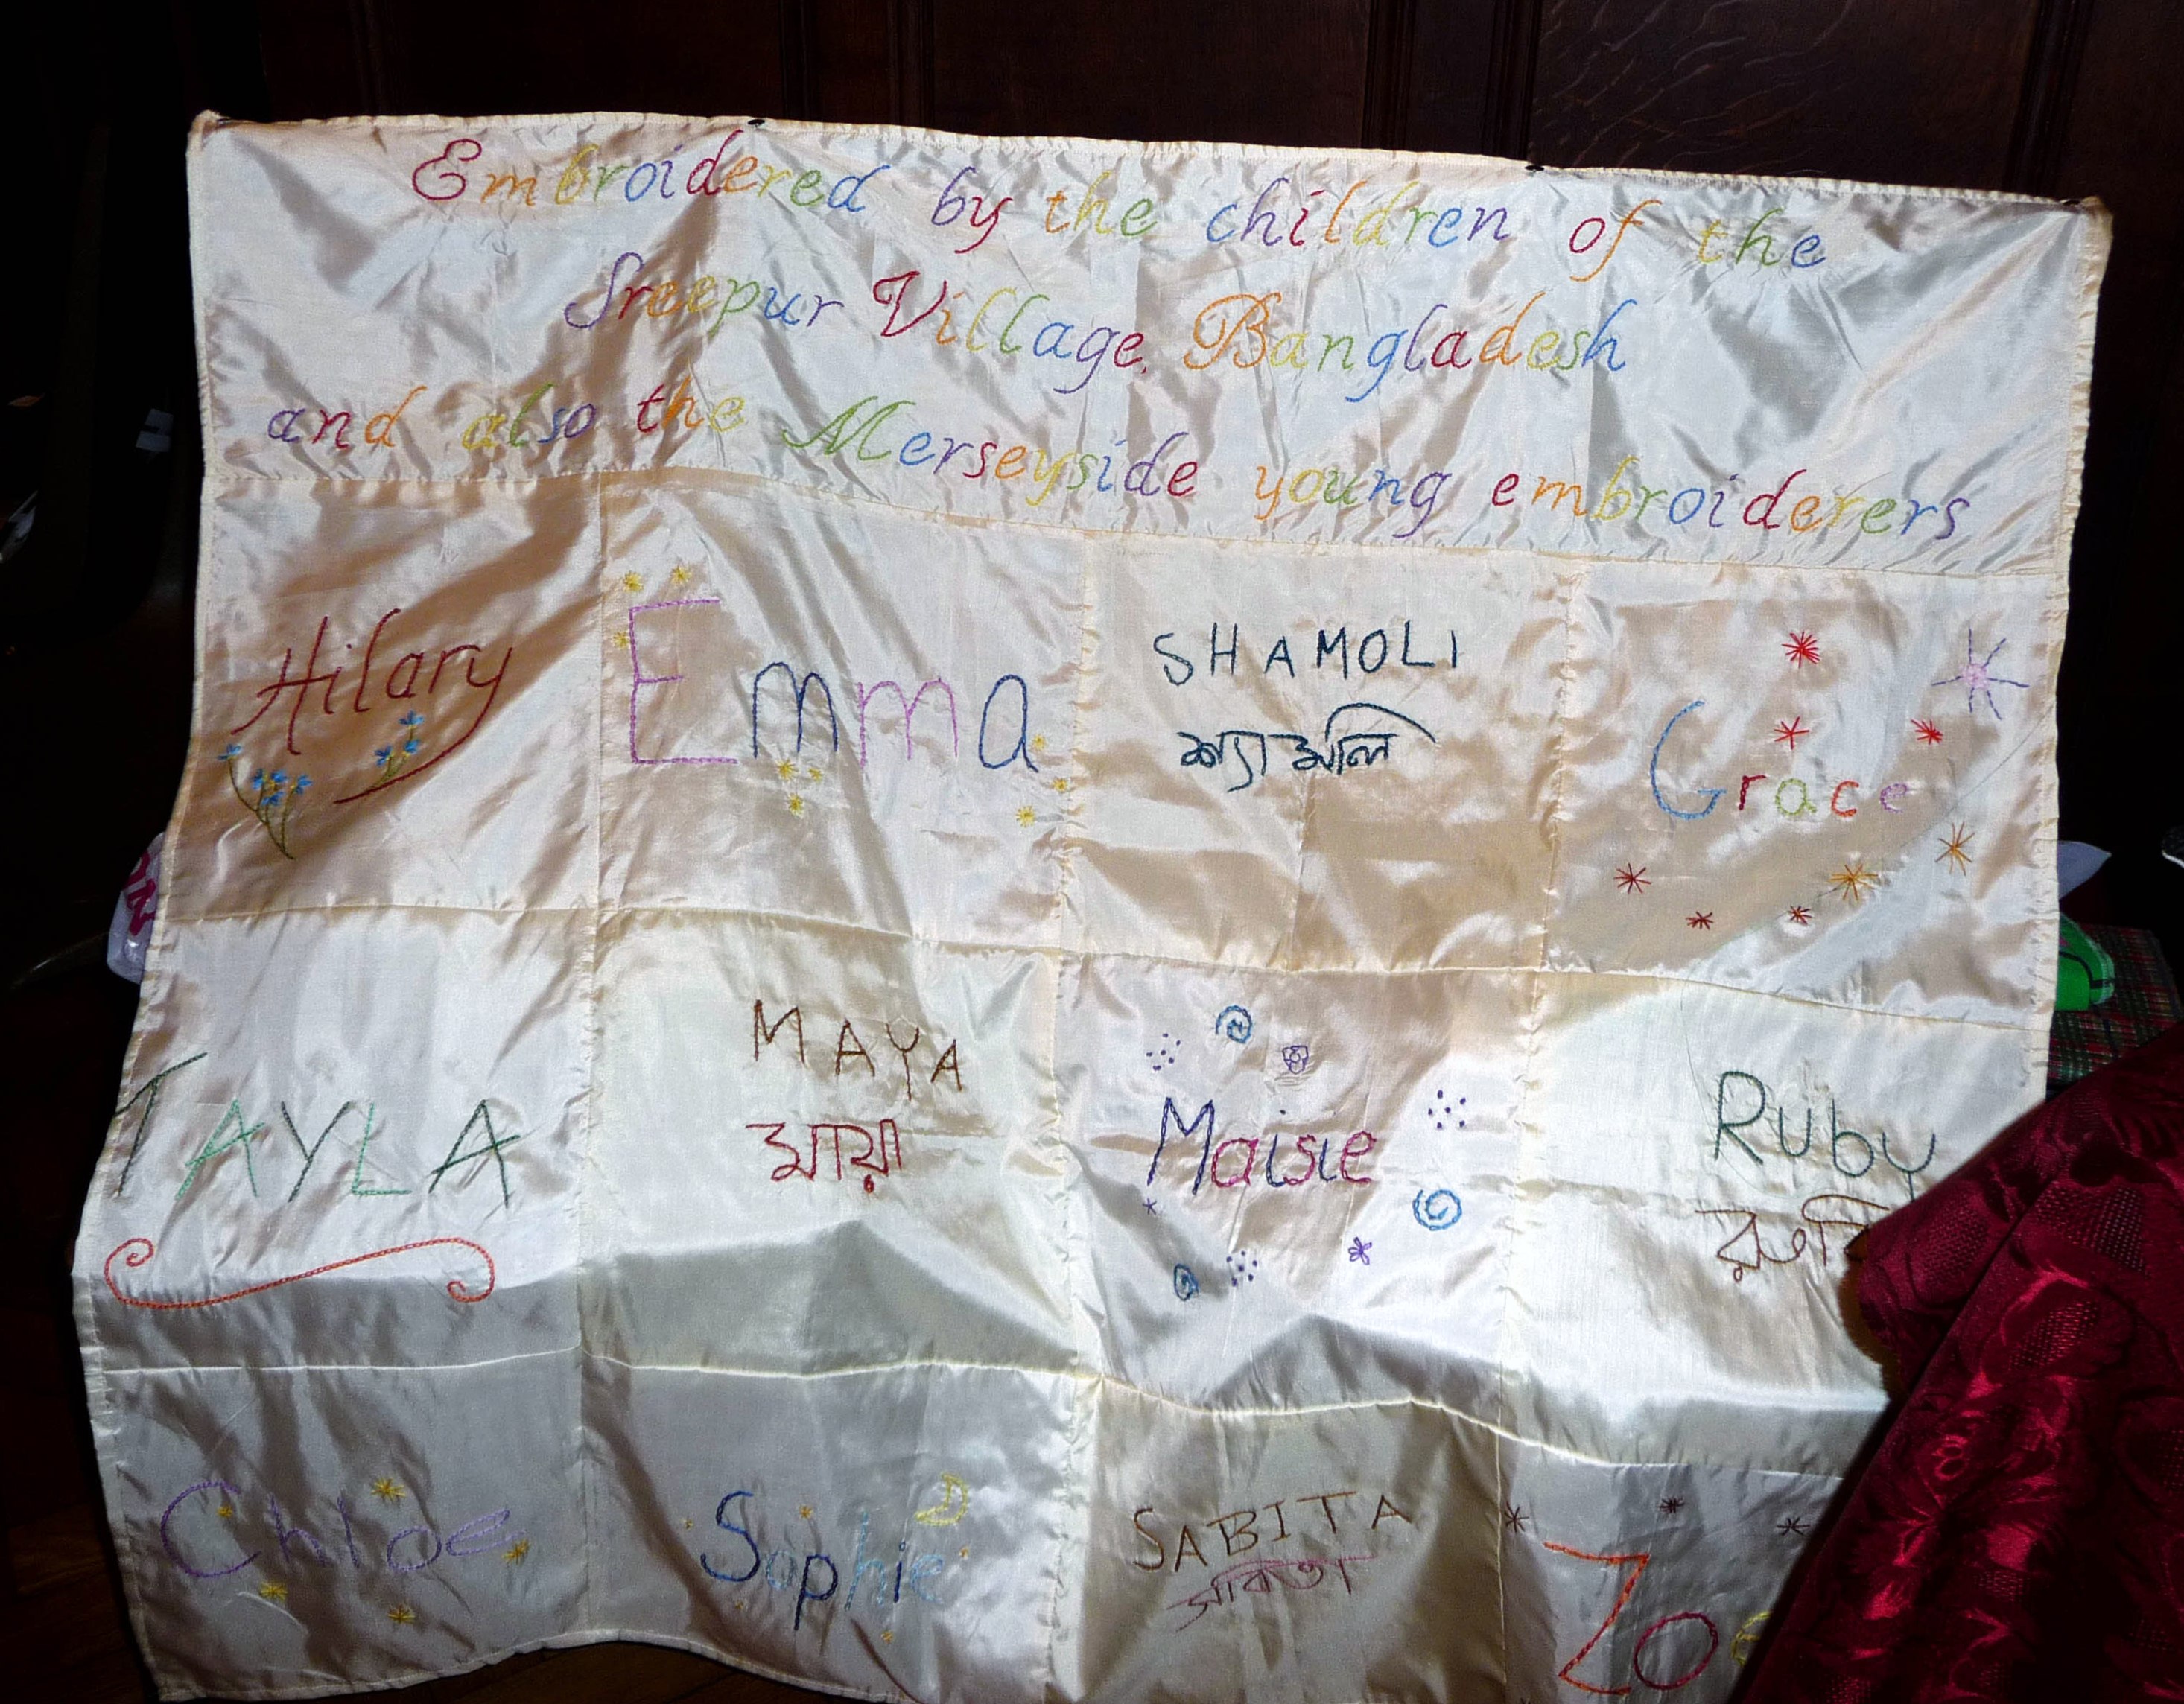 embroidered quilt jointly made by the children of Sreepur Village, Bangladesh and Merseyside Young Embroiderers